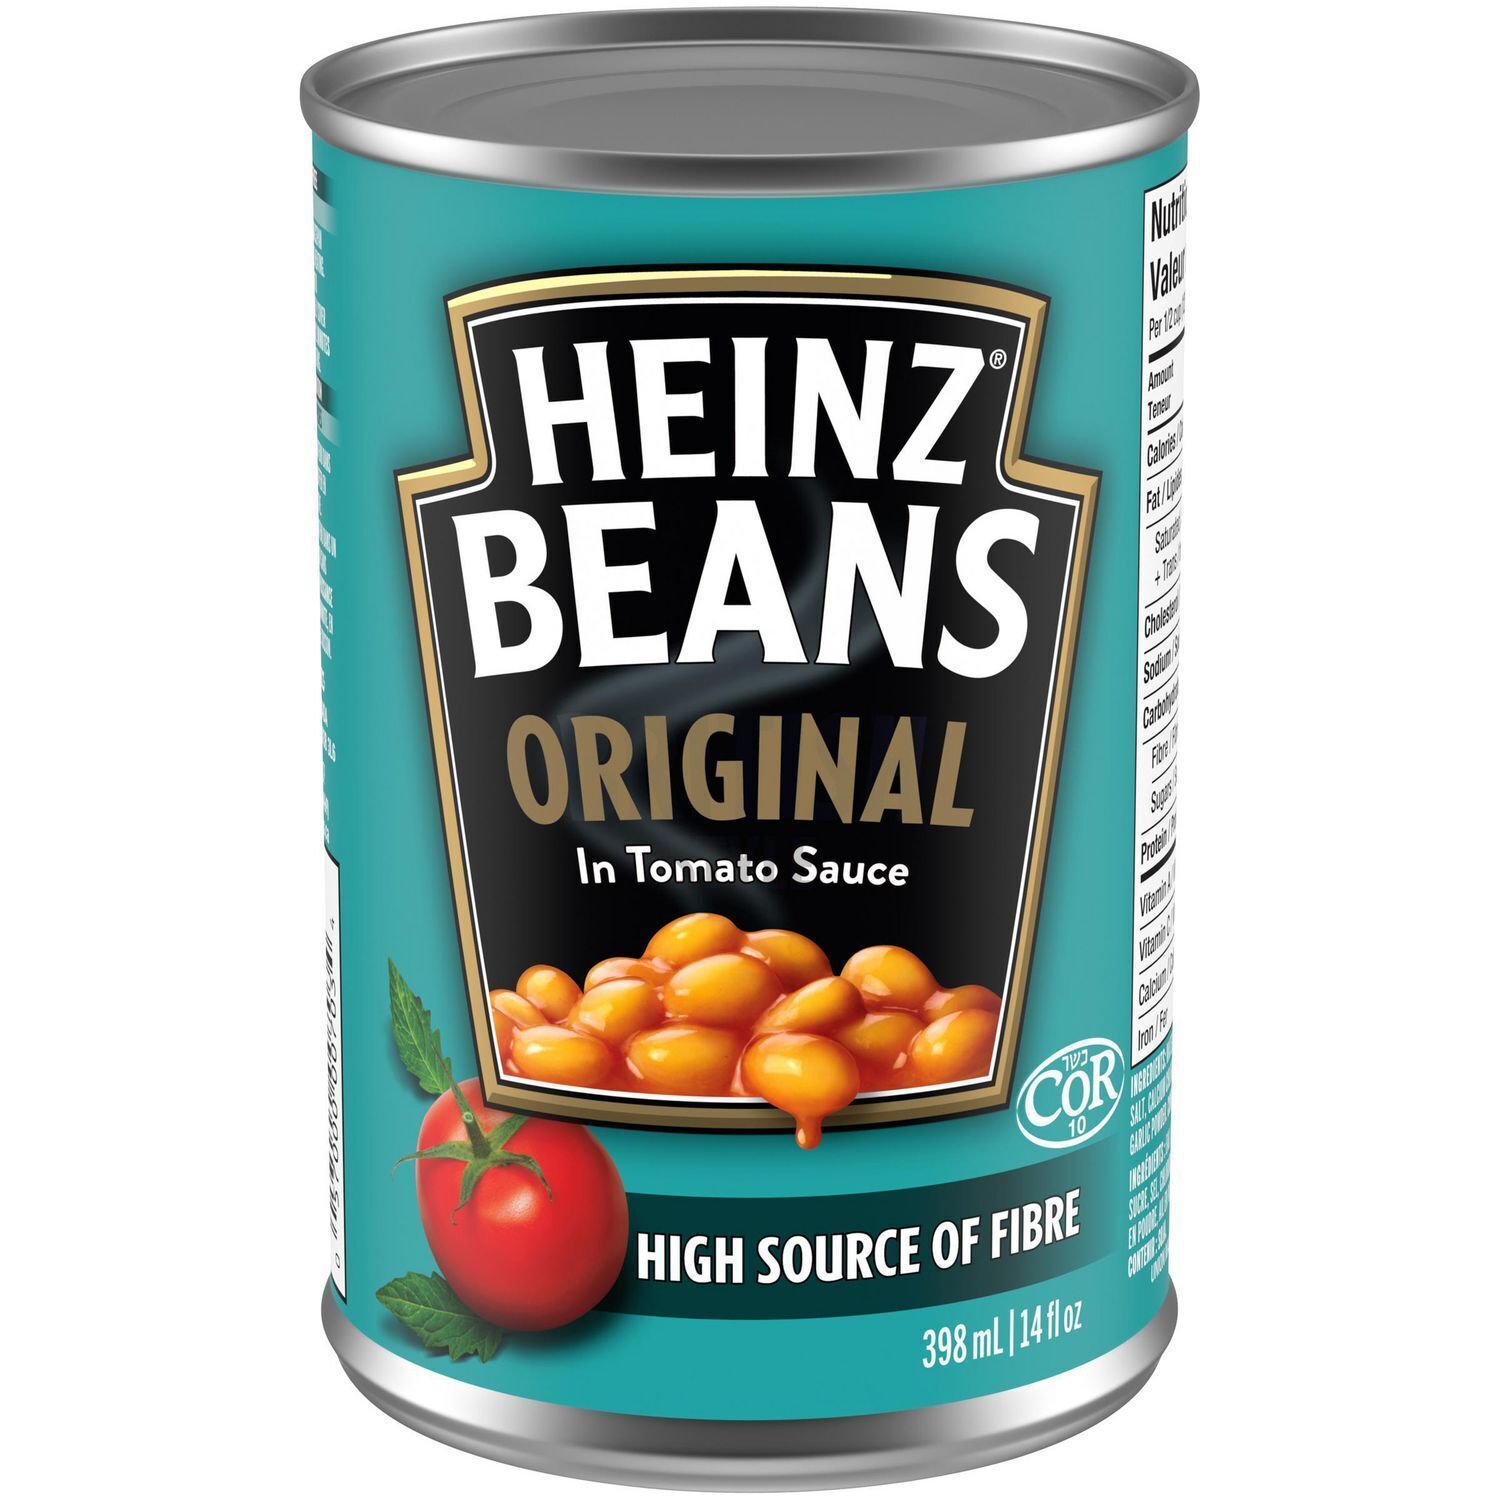 Primary image for 12 Cans of Heinz Original Beans in Tomato Sauce 398ml Each -Free Shipping